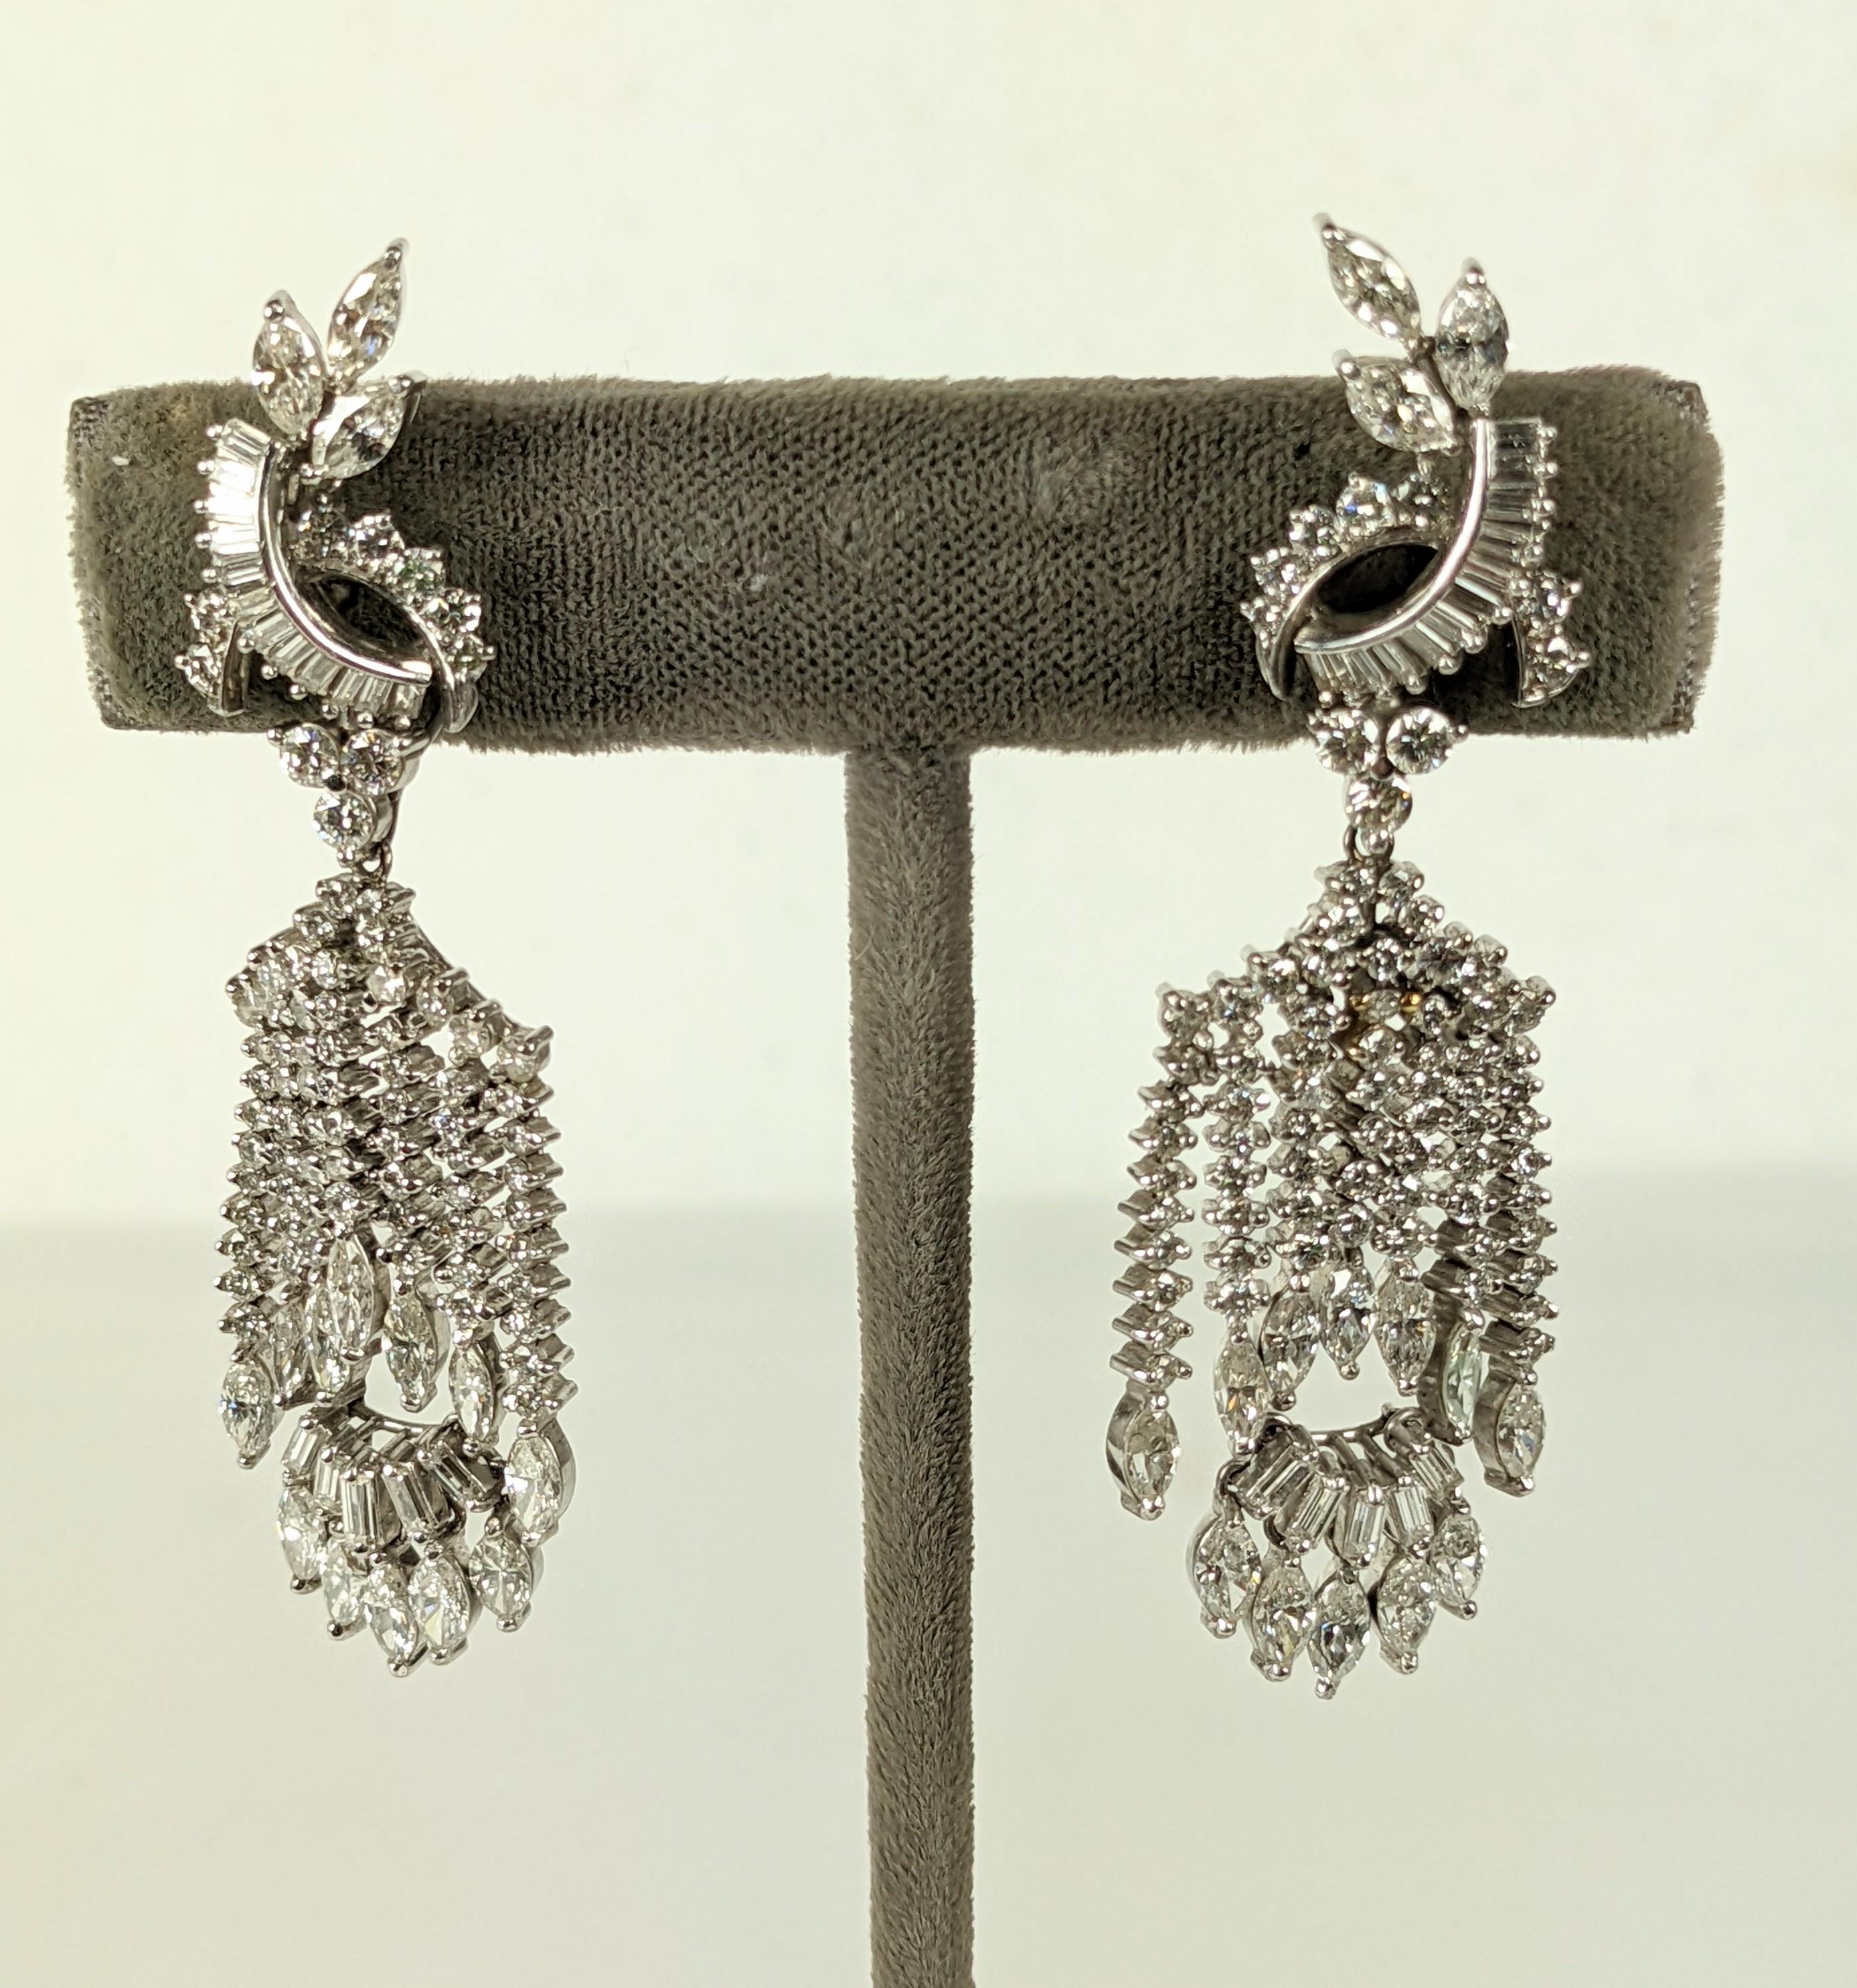 Charming and amazing Surrealist Dali Style Diamond Articulated Dangling Man Earrings in 14k white gold. Lines of prong set round diamonds end in marquise shaped stones which represent hands and the 